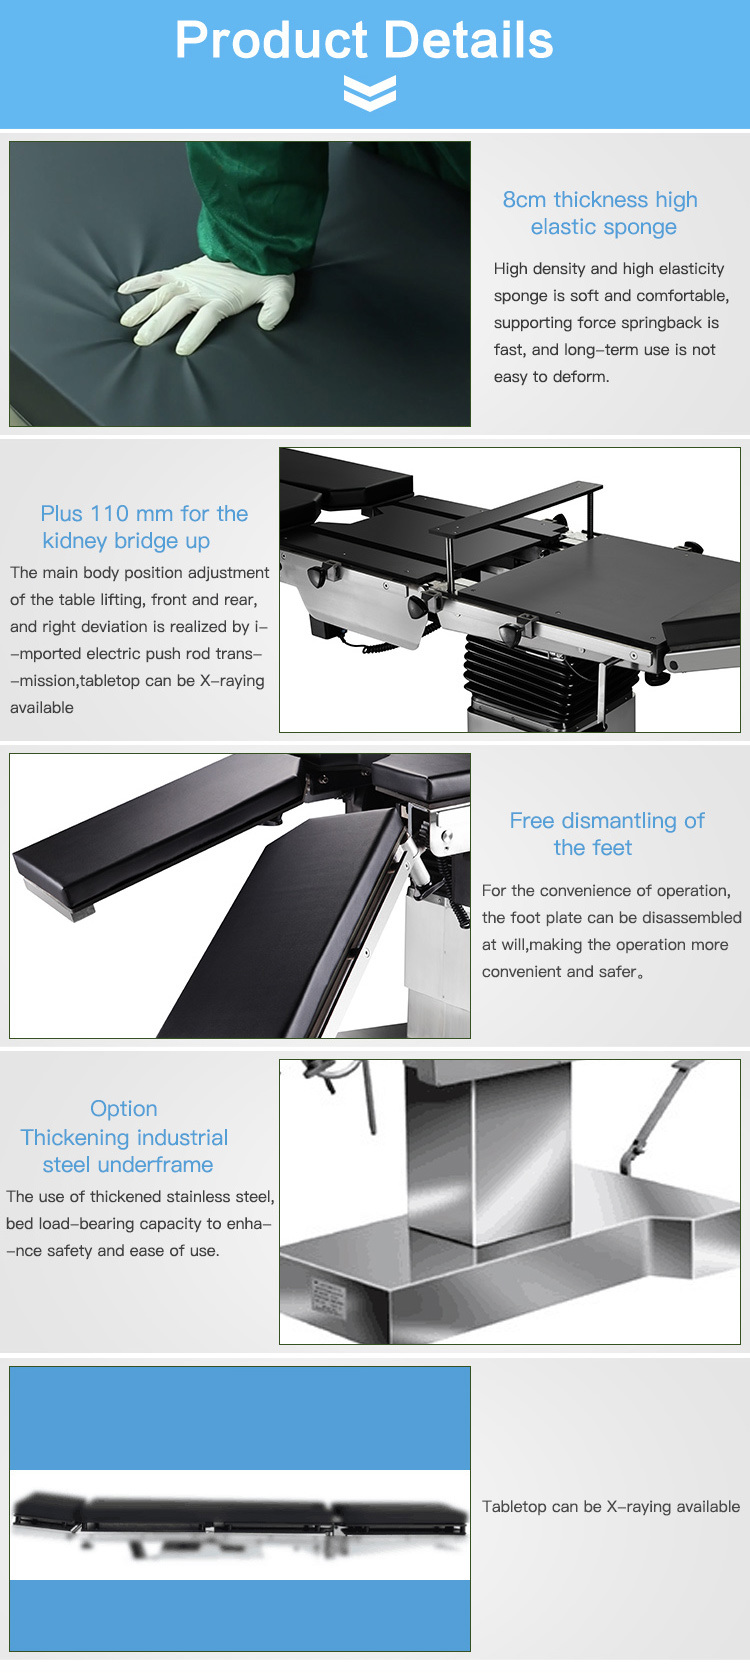 Stainless Steel Manual Operating Table Medical Operation for Surgical Operation Room (MT600)